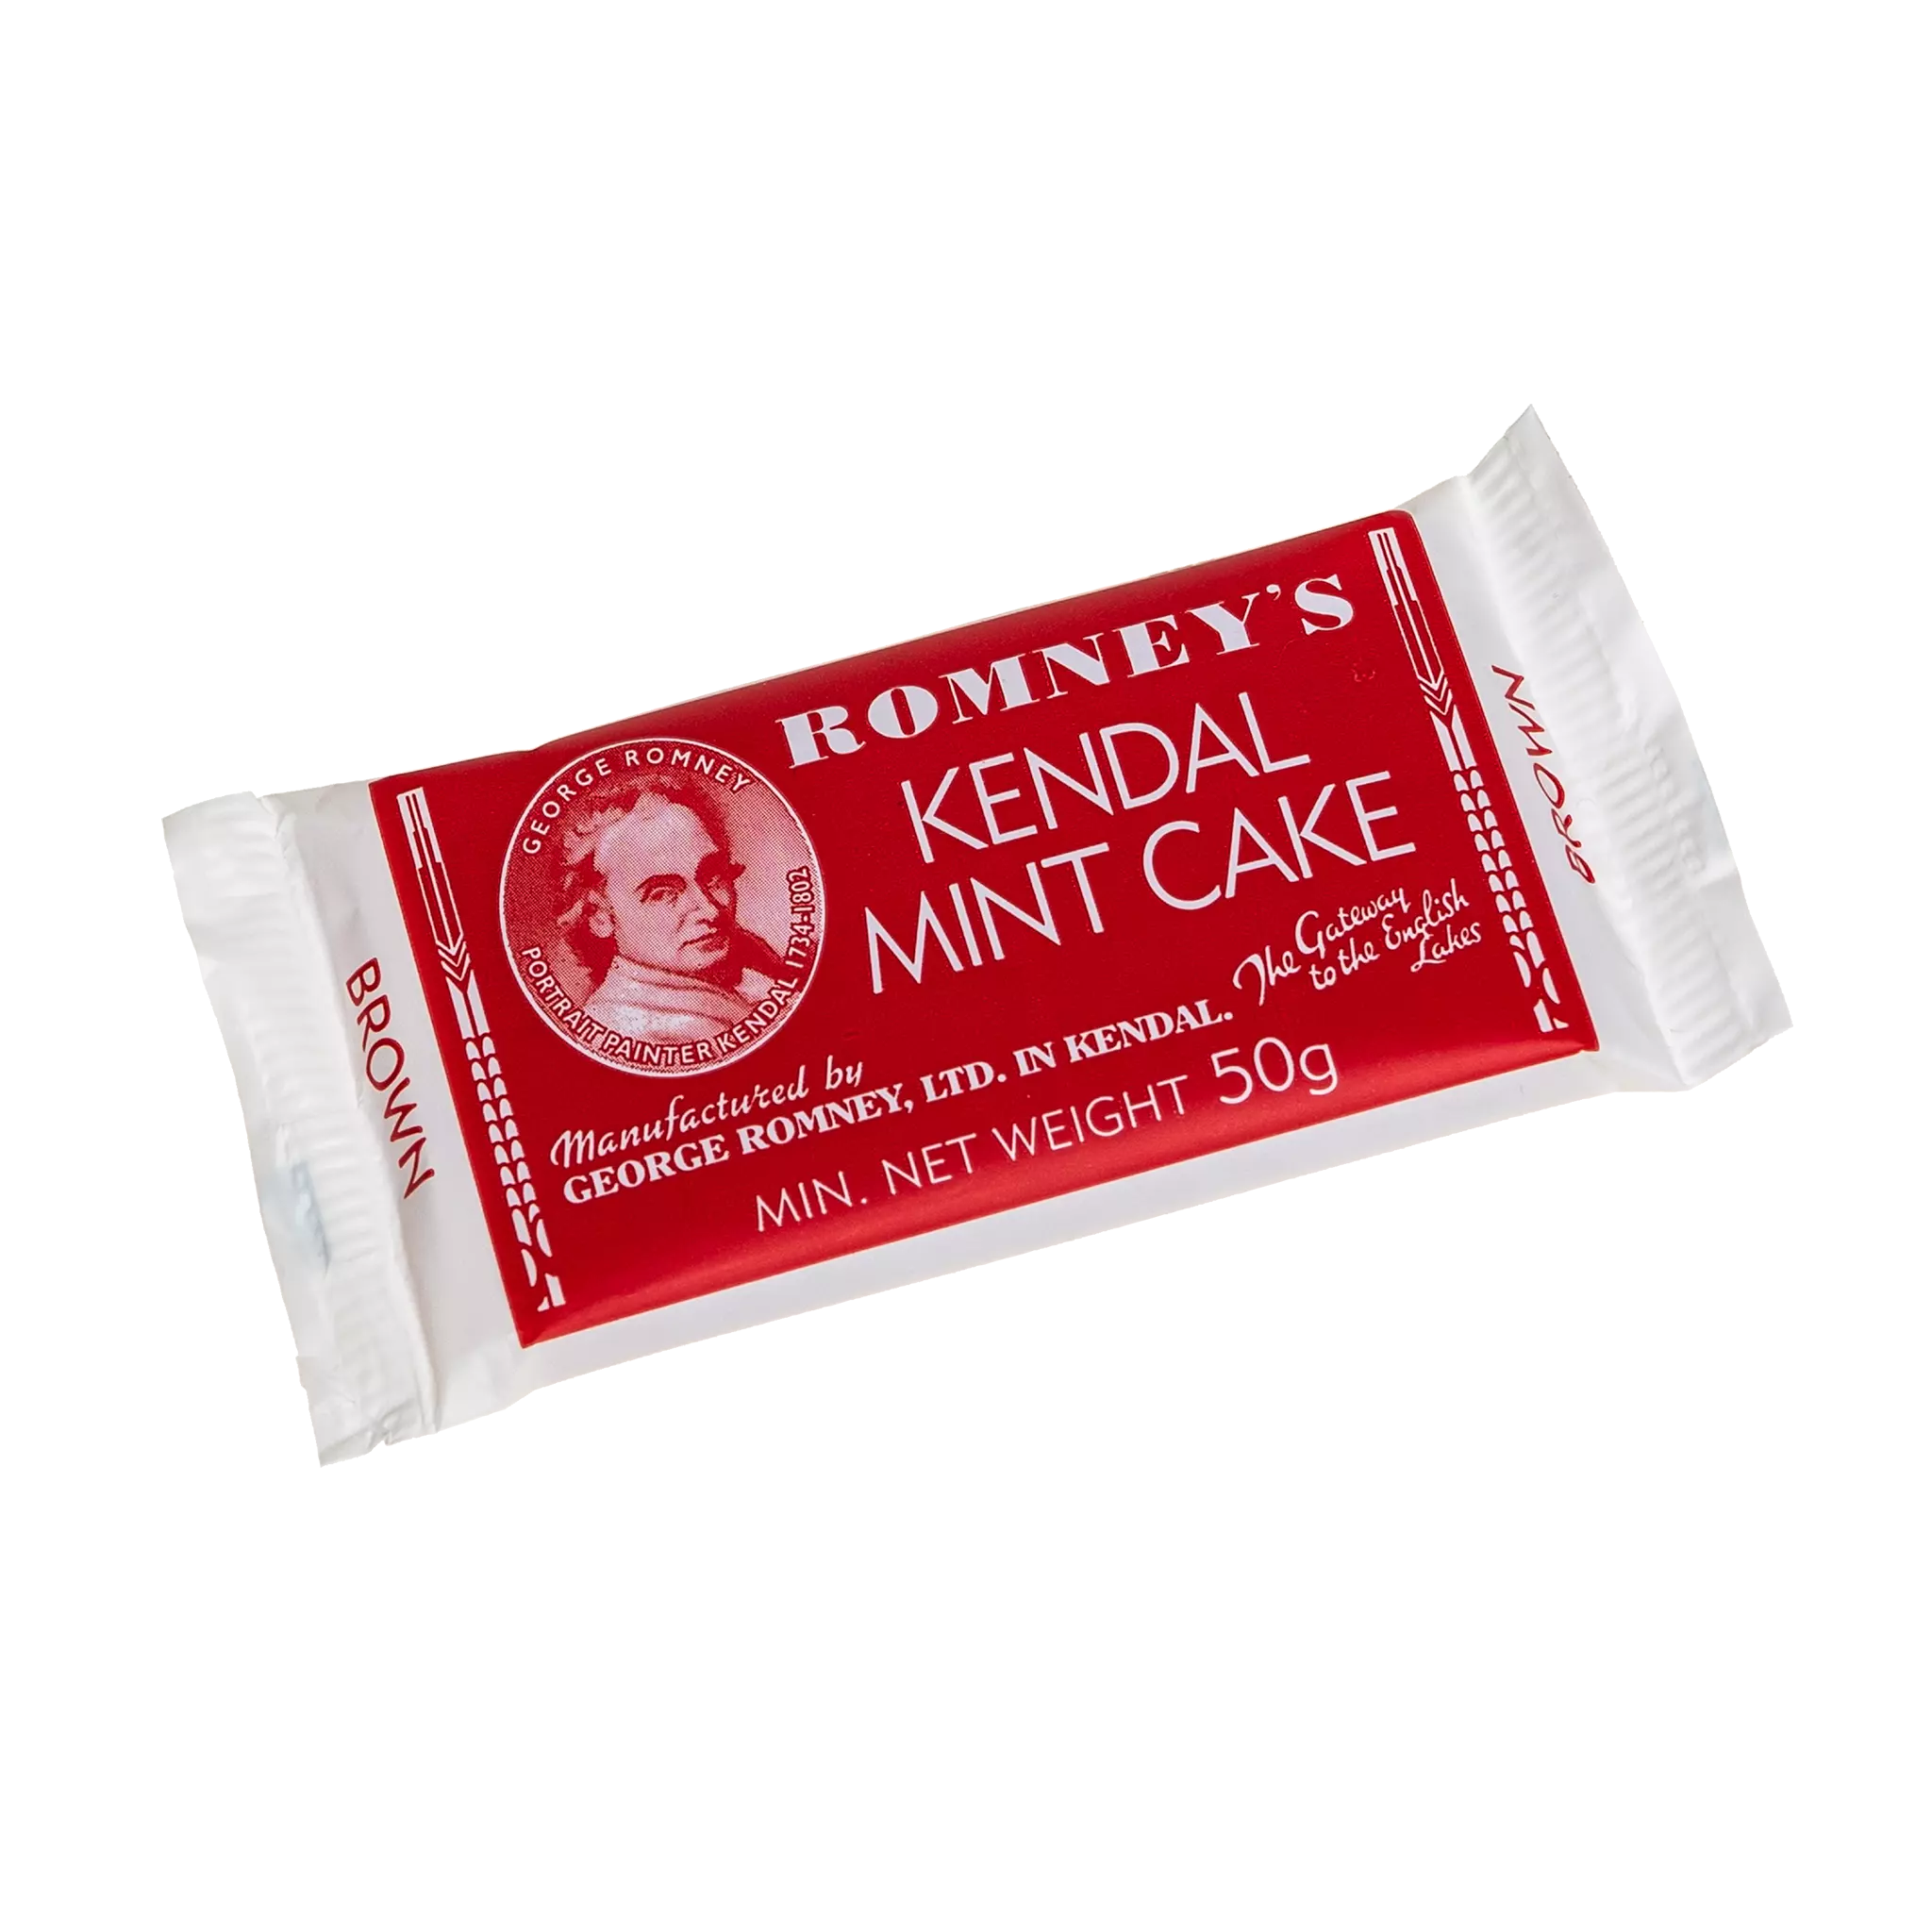 A rectangular bar of 50g Romney's Kendal Mint Cake in a red and white wrapper. It features the Romney's logo and words 'Romney's Kendal Mint Cake' in white on the front